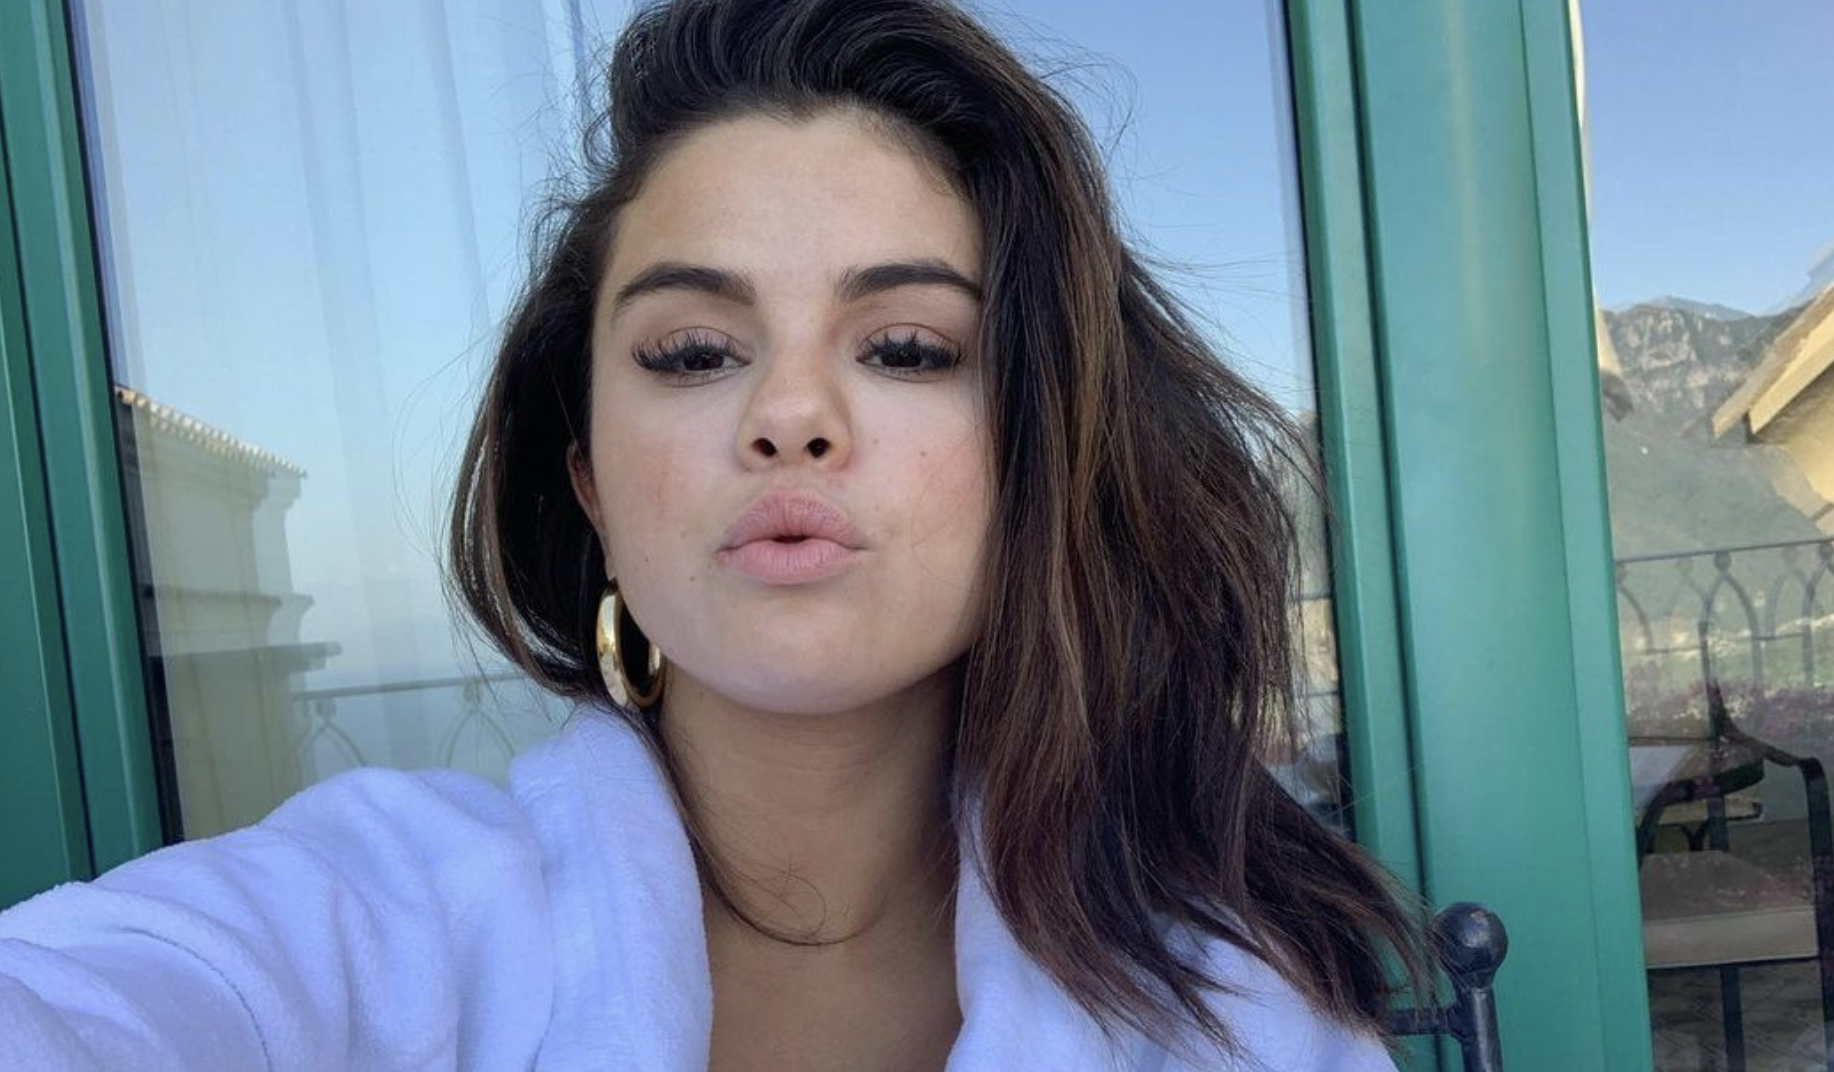 Look Selena Gomezs Back Tattoo And What It Could Mean